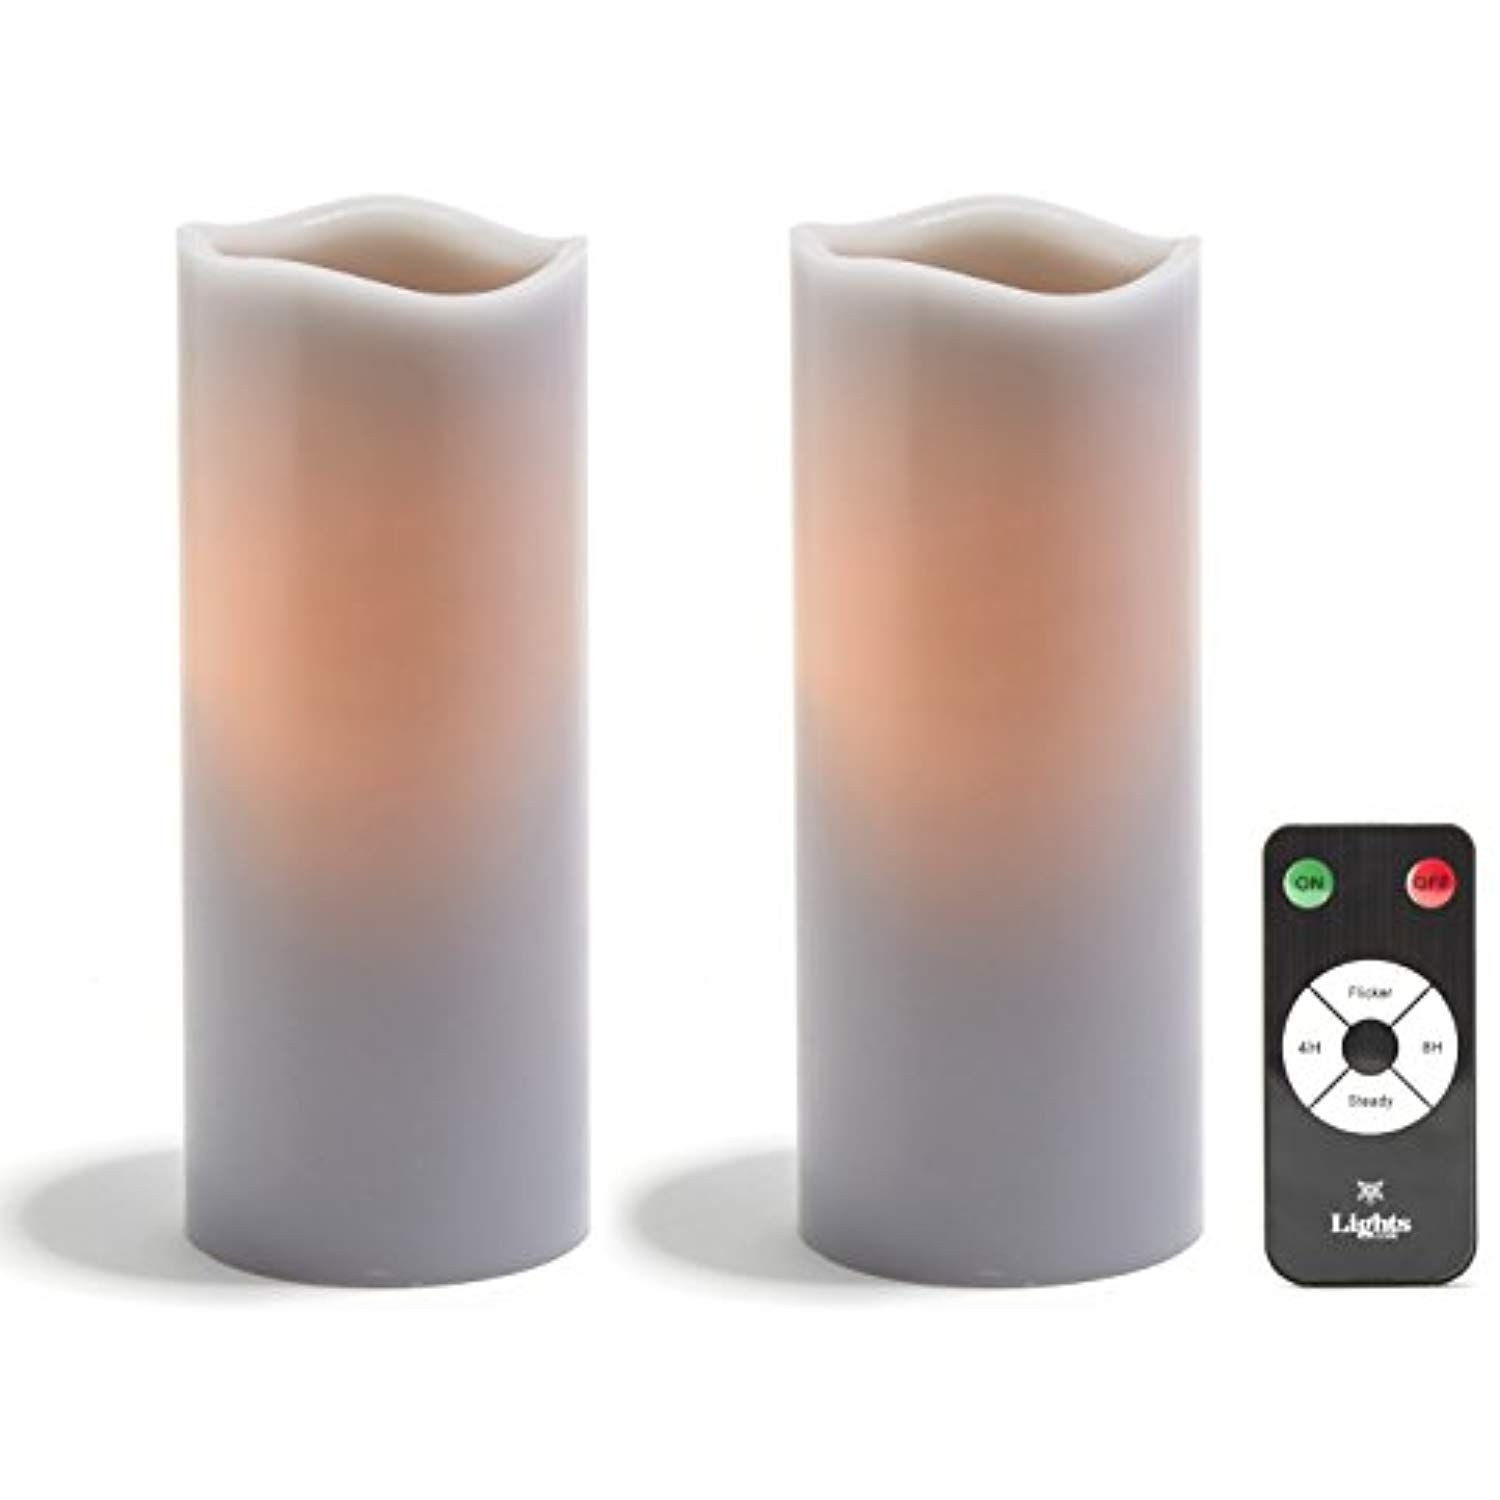 Large grey flameless pillar candles with remote set of 2